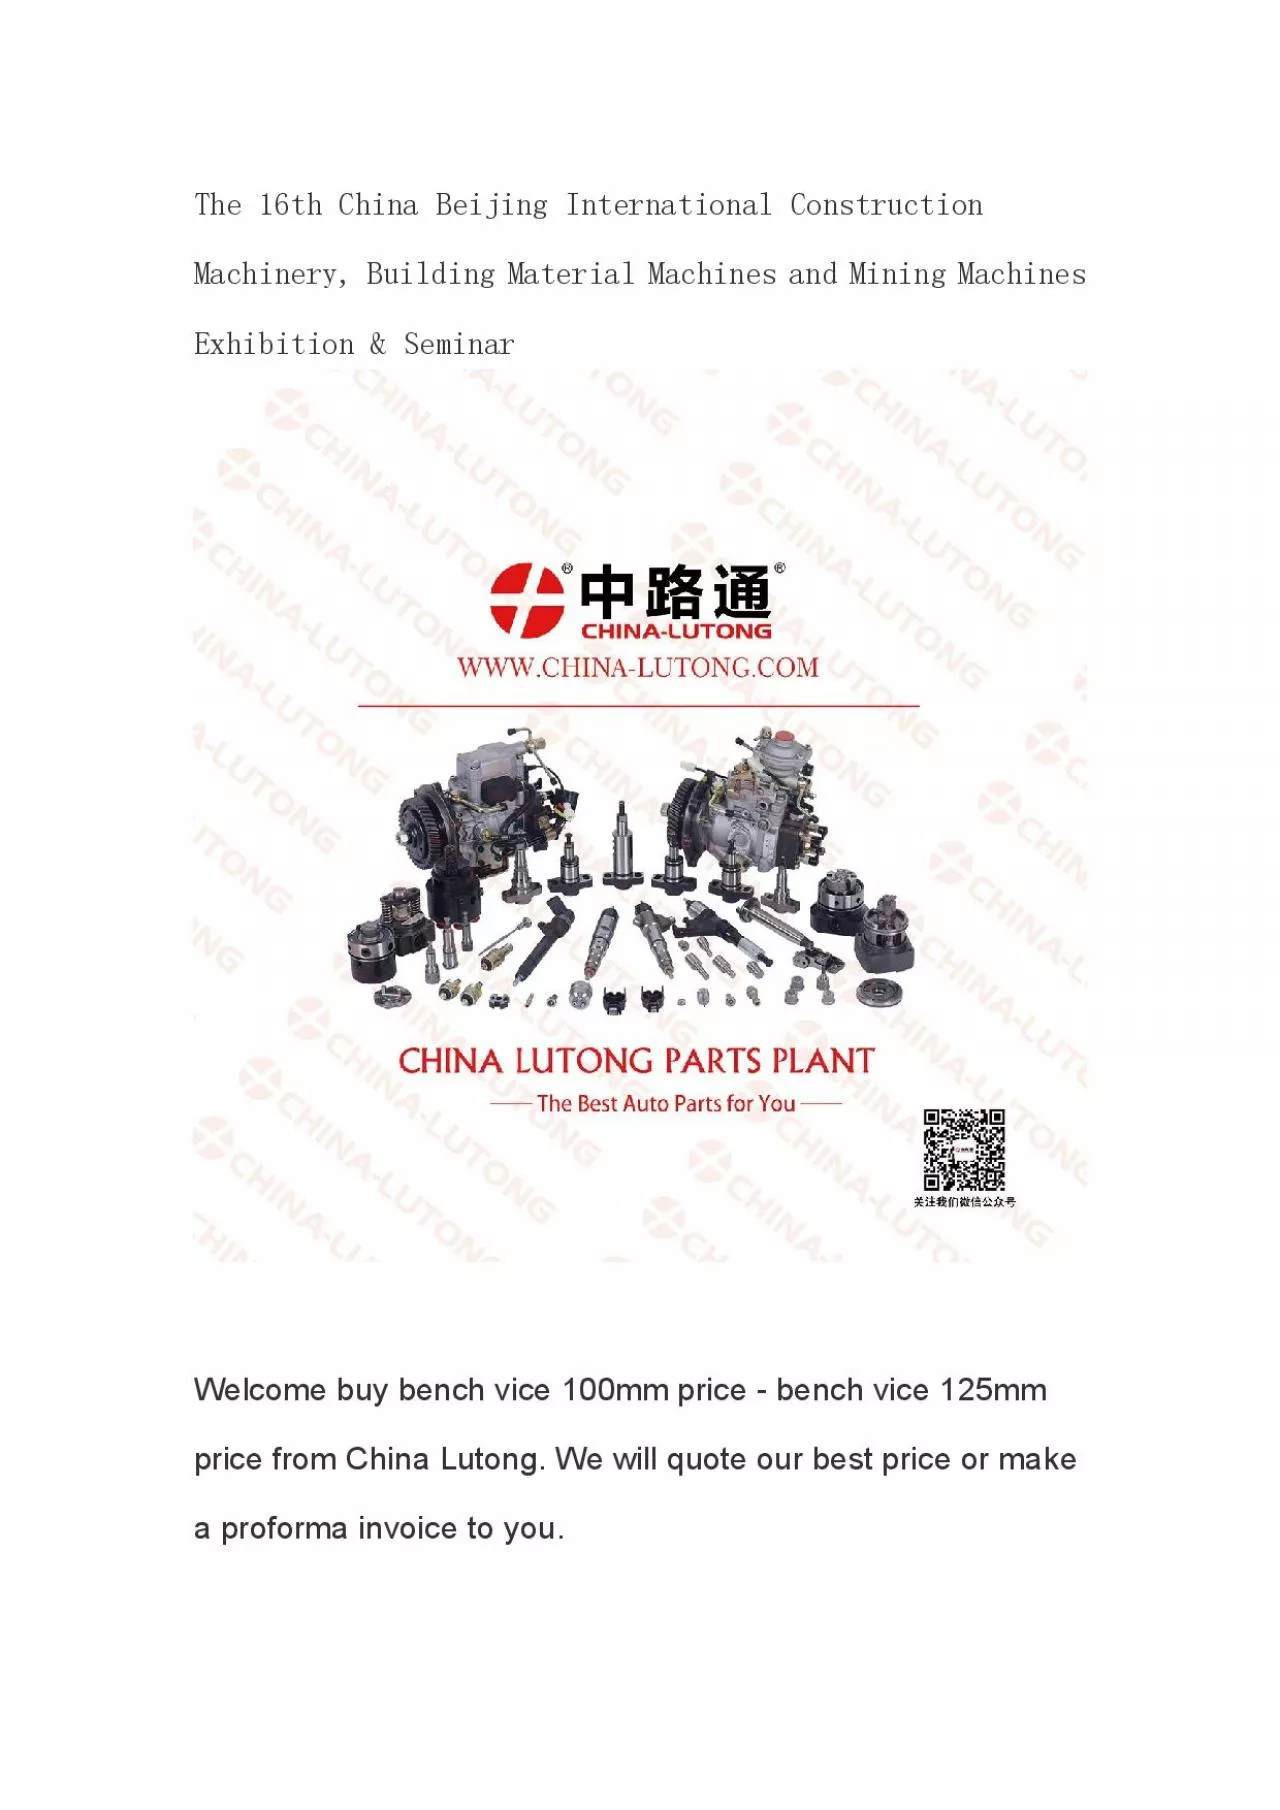 The 16th China Beijing International Construction Machinery, Building Material Machines